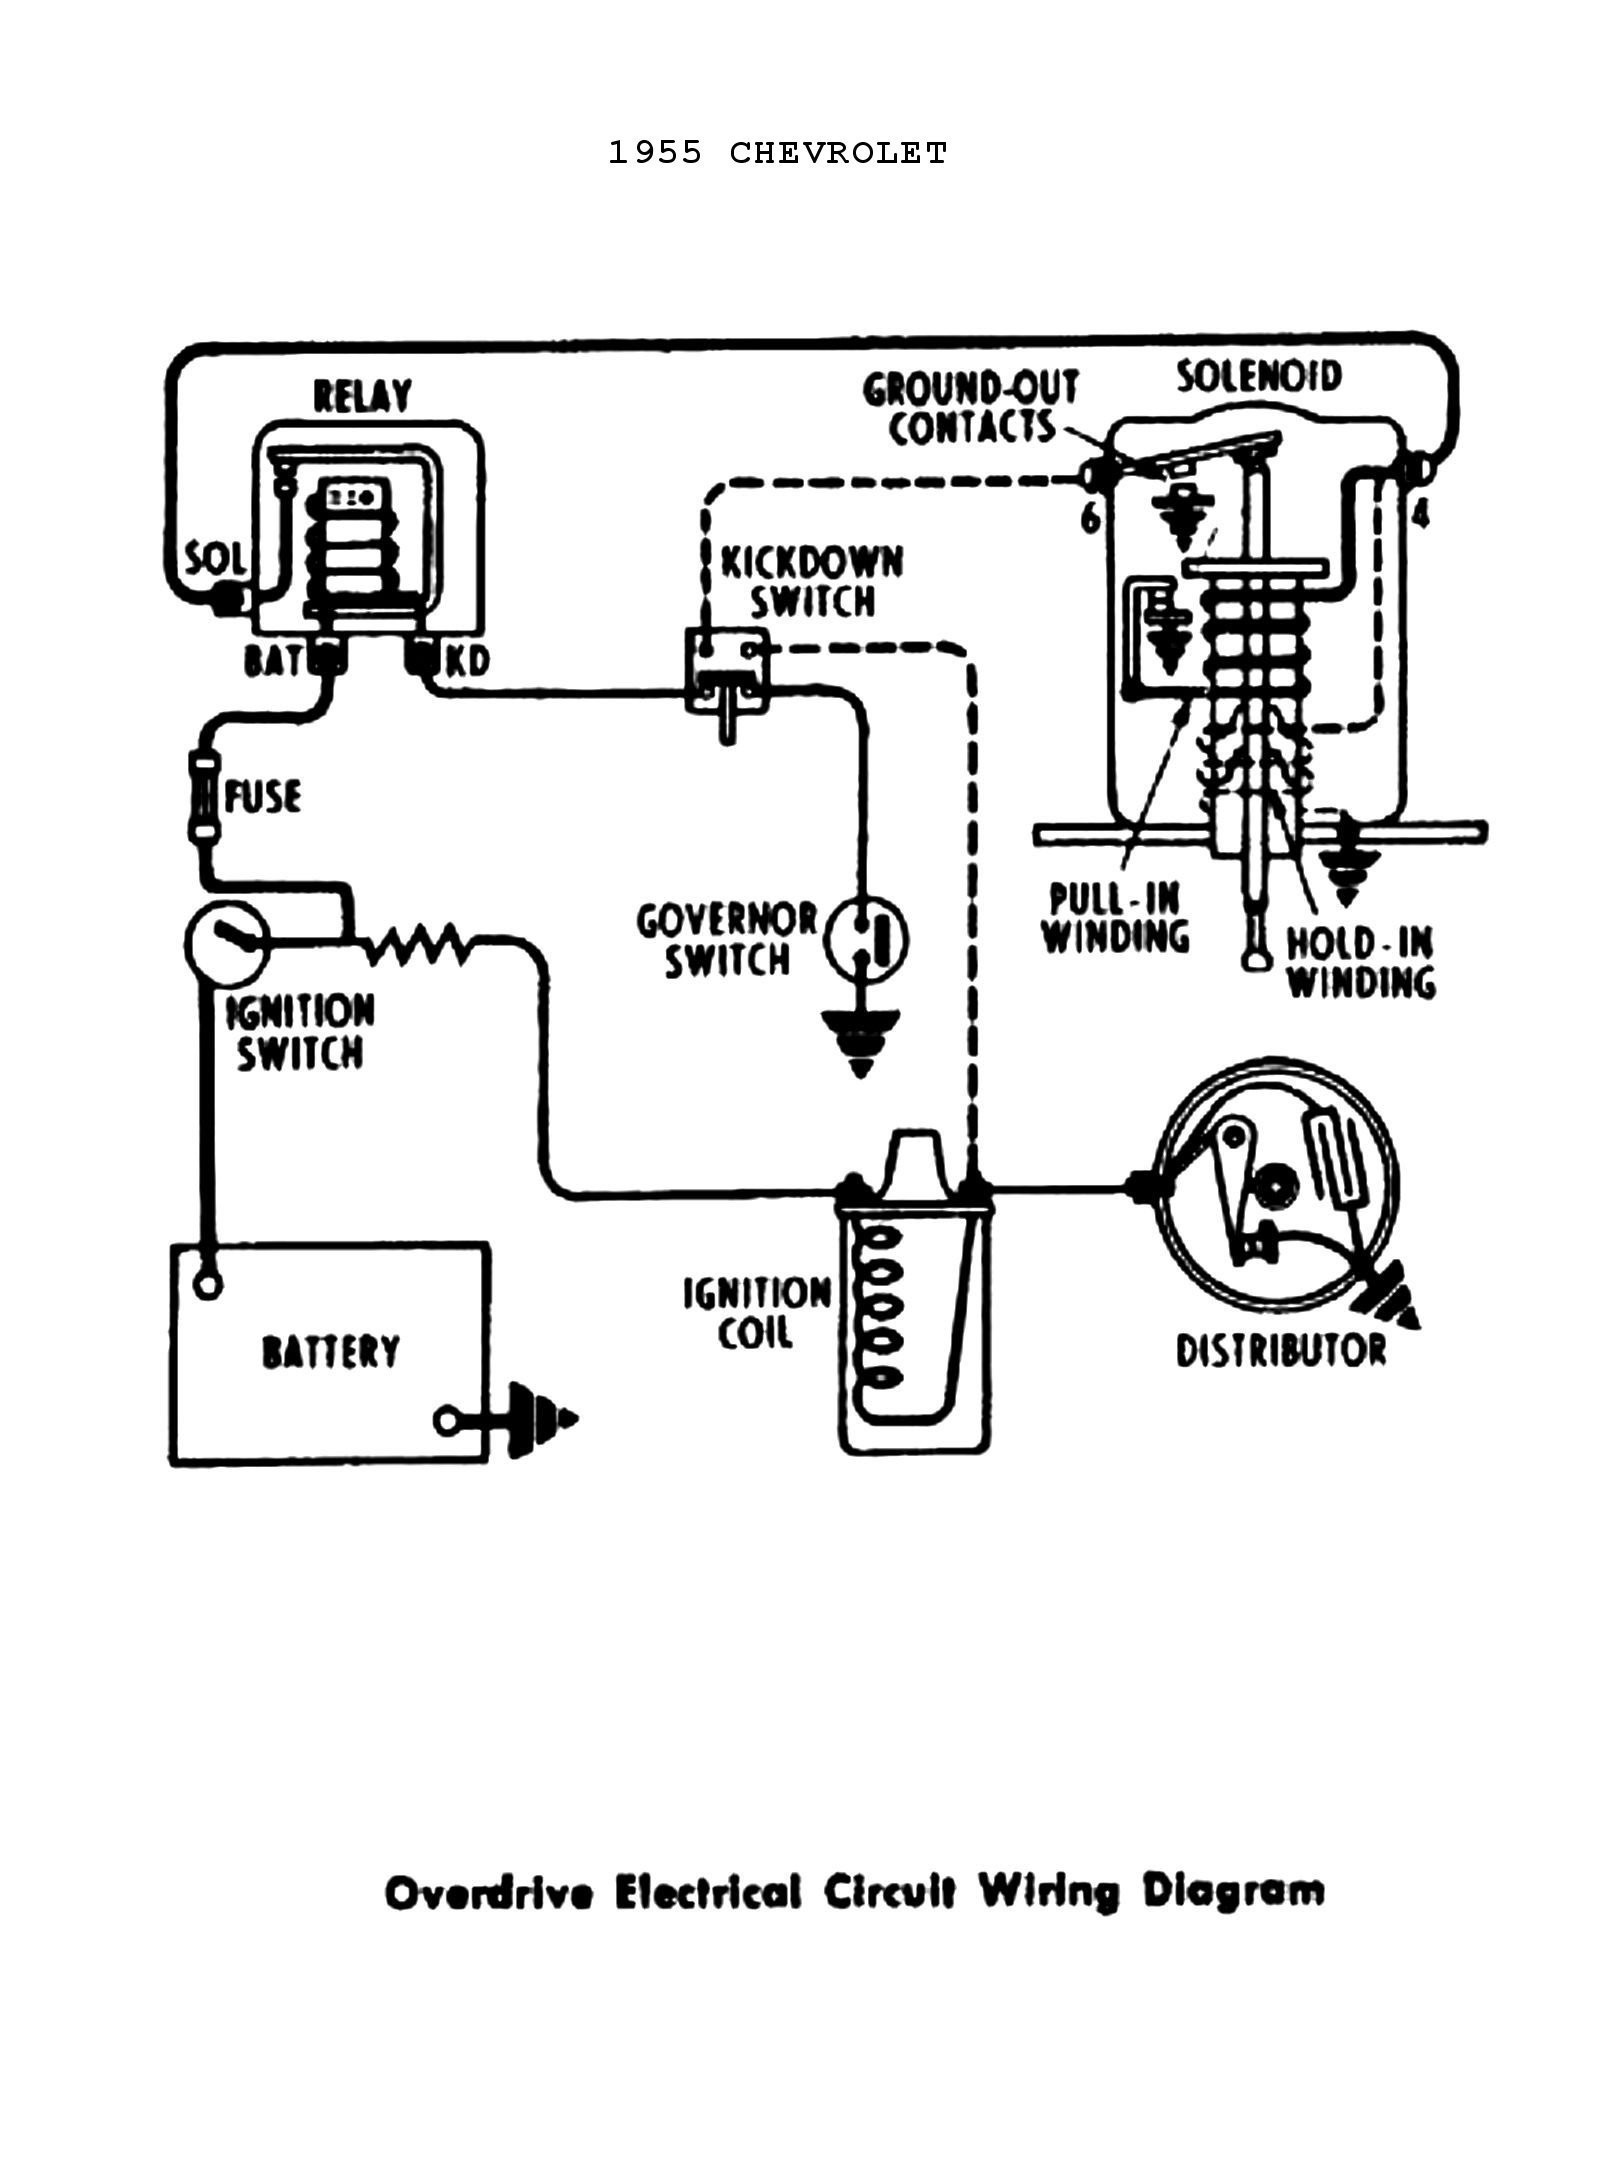 Hei Distributor Wiring Diagram Chevy 35 Rate Points Ignition System Wiring Diagram Save Chevy 35 Coil